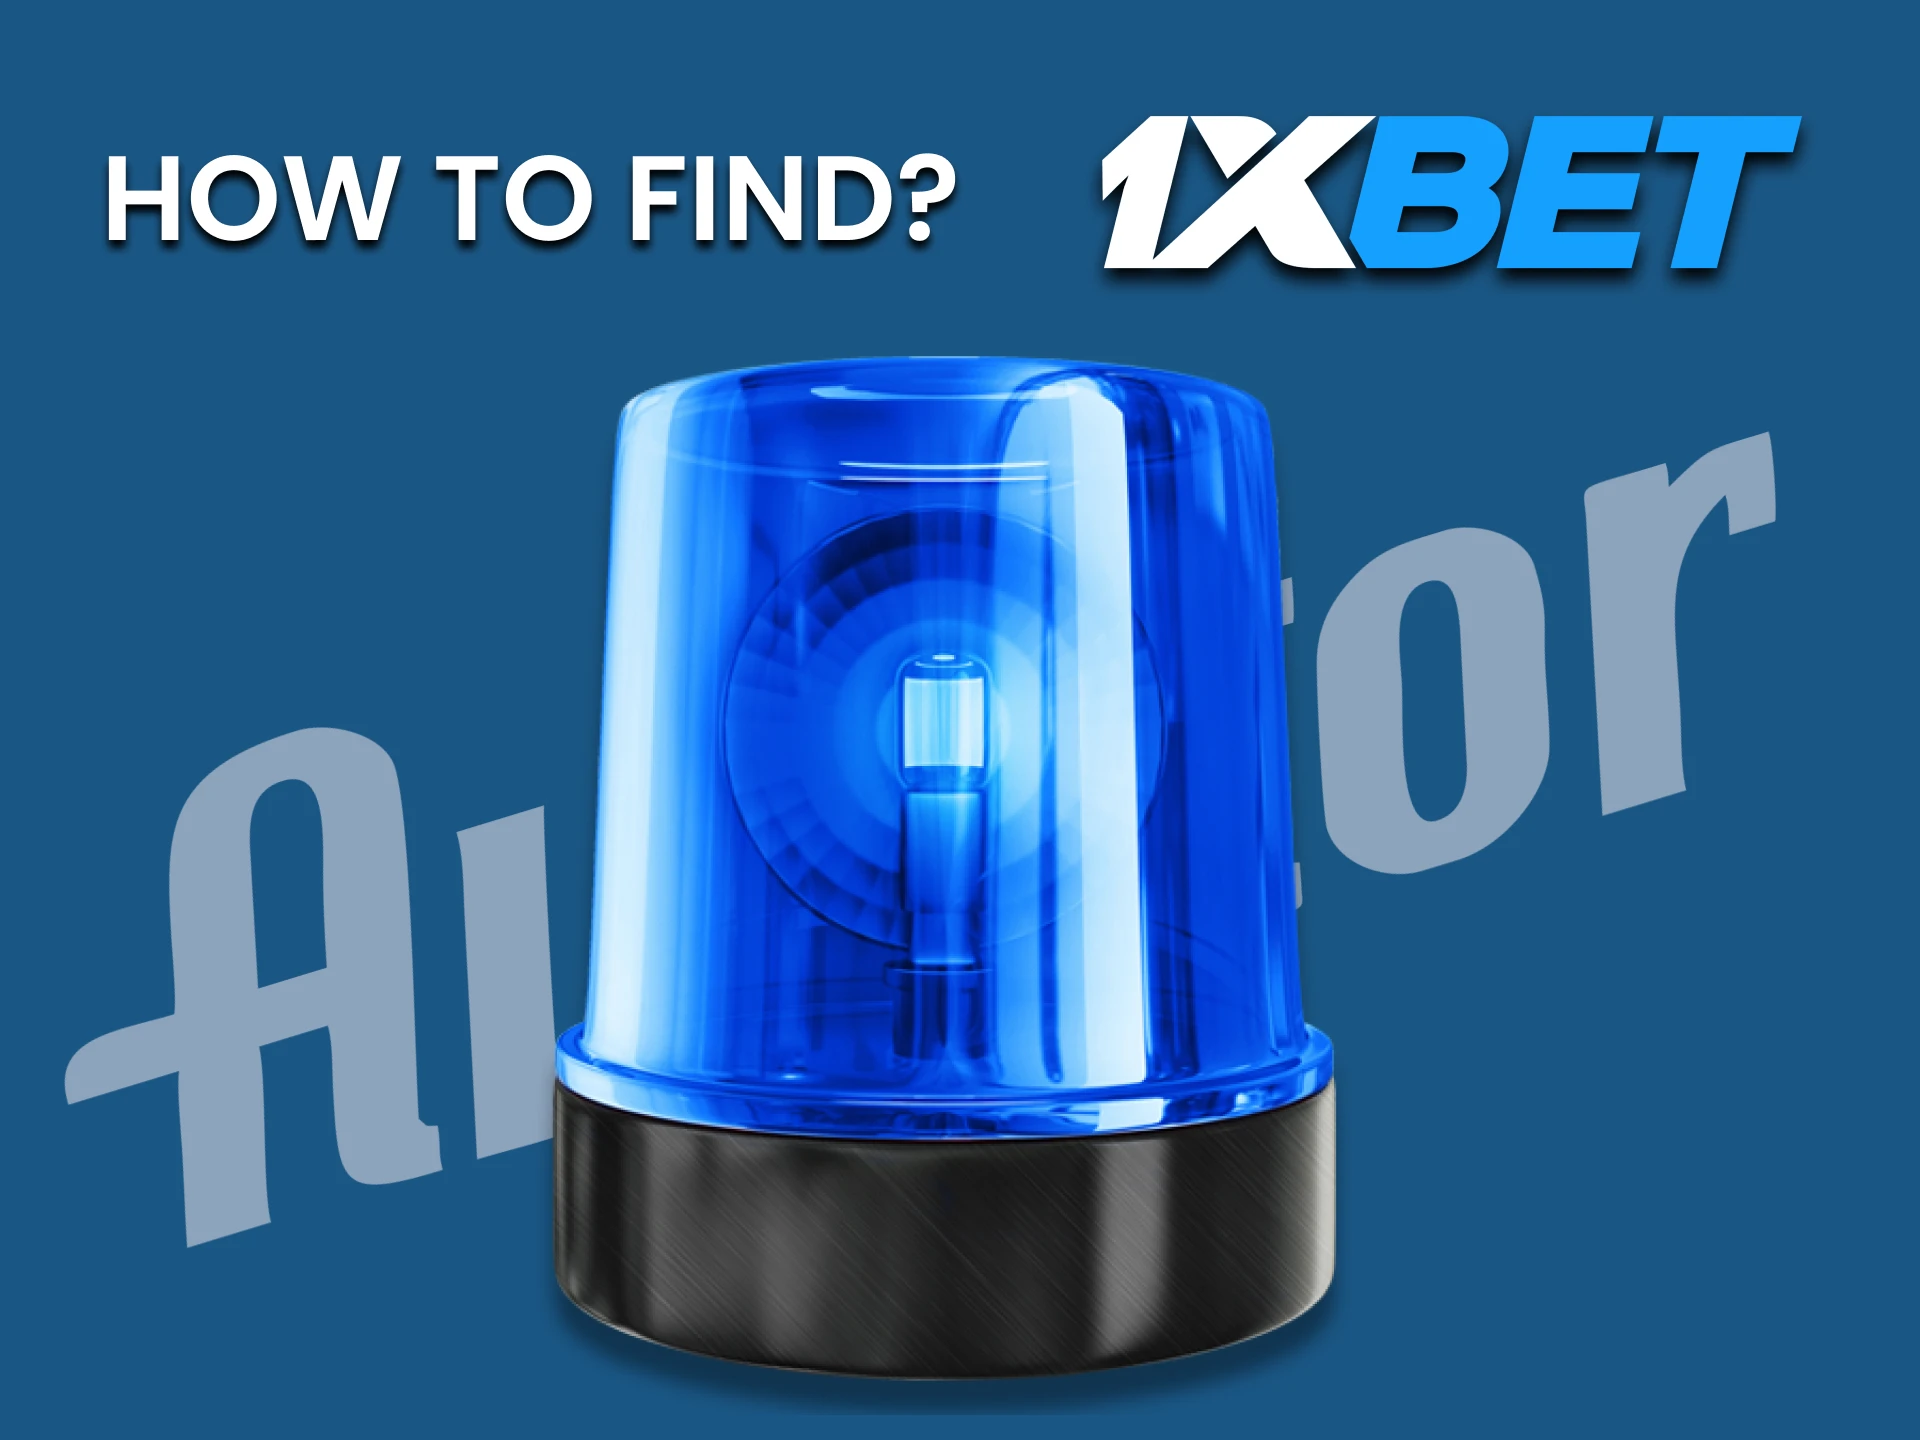 Let's tell you how to find a signal for Aviator from 1xbet.